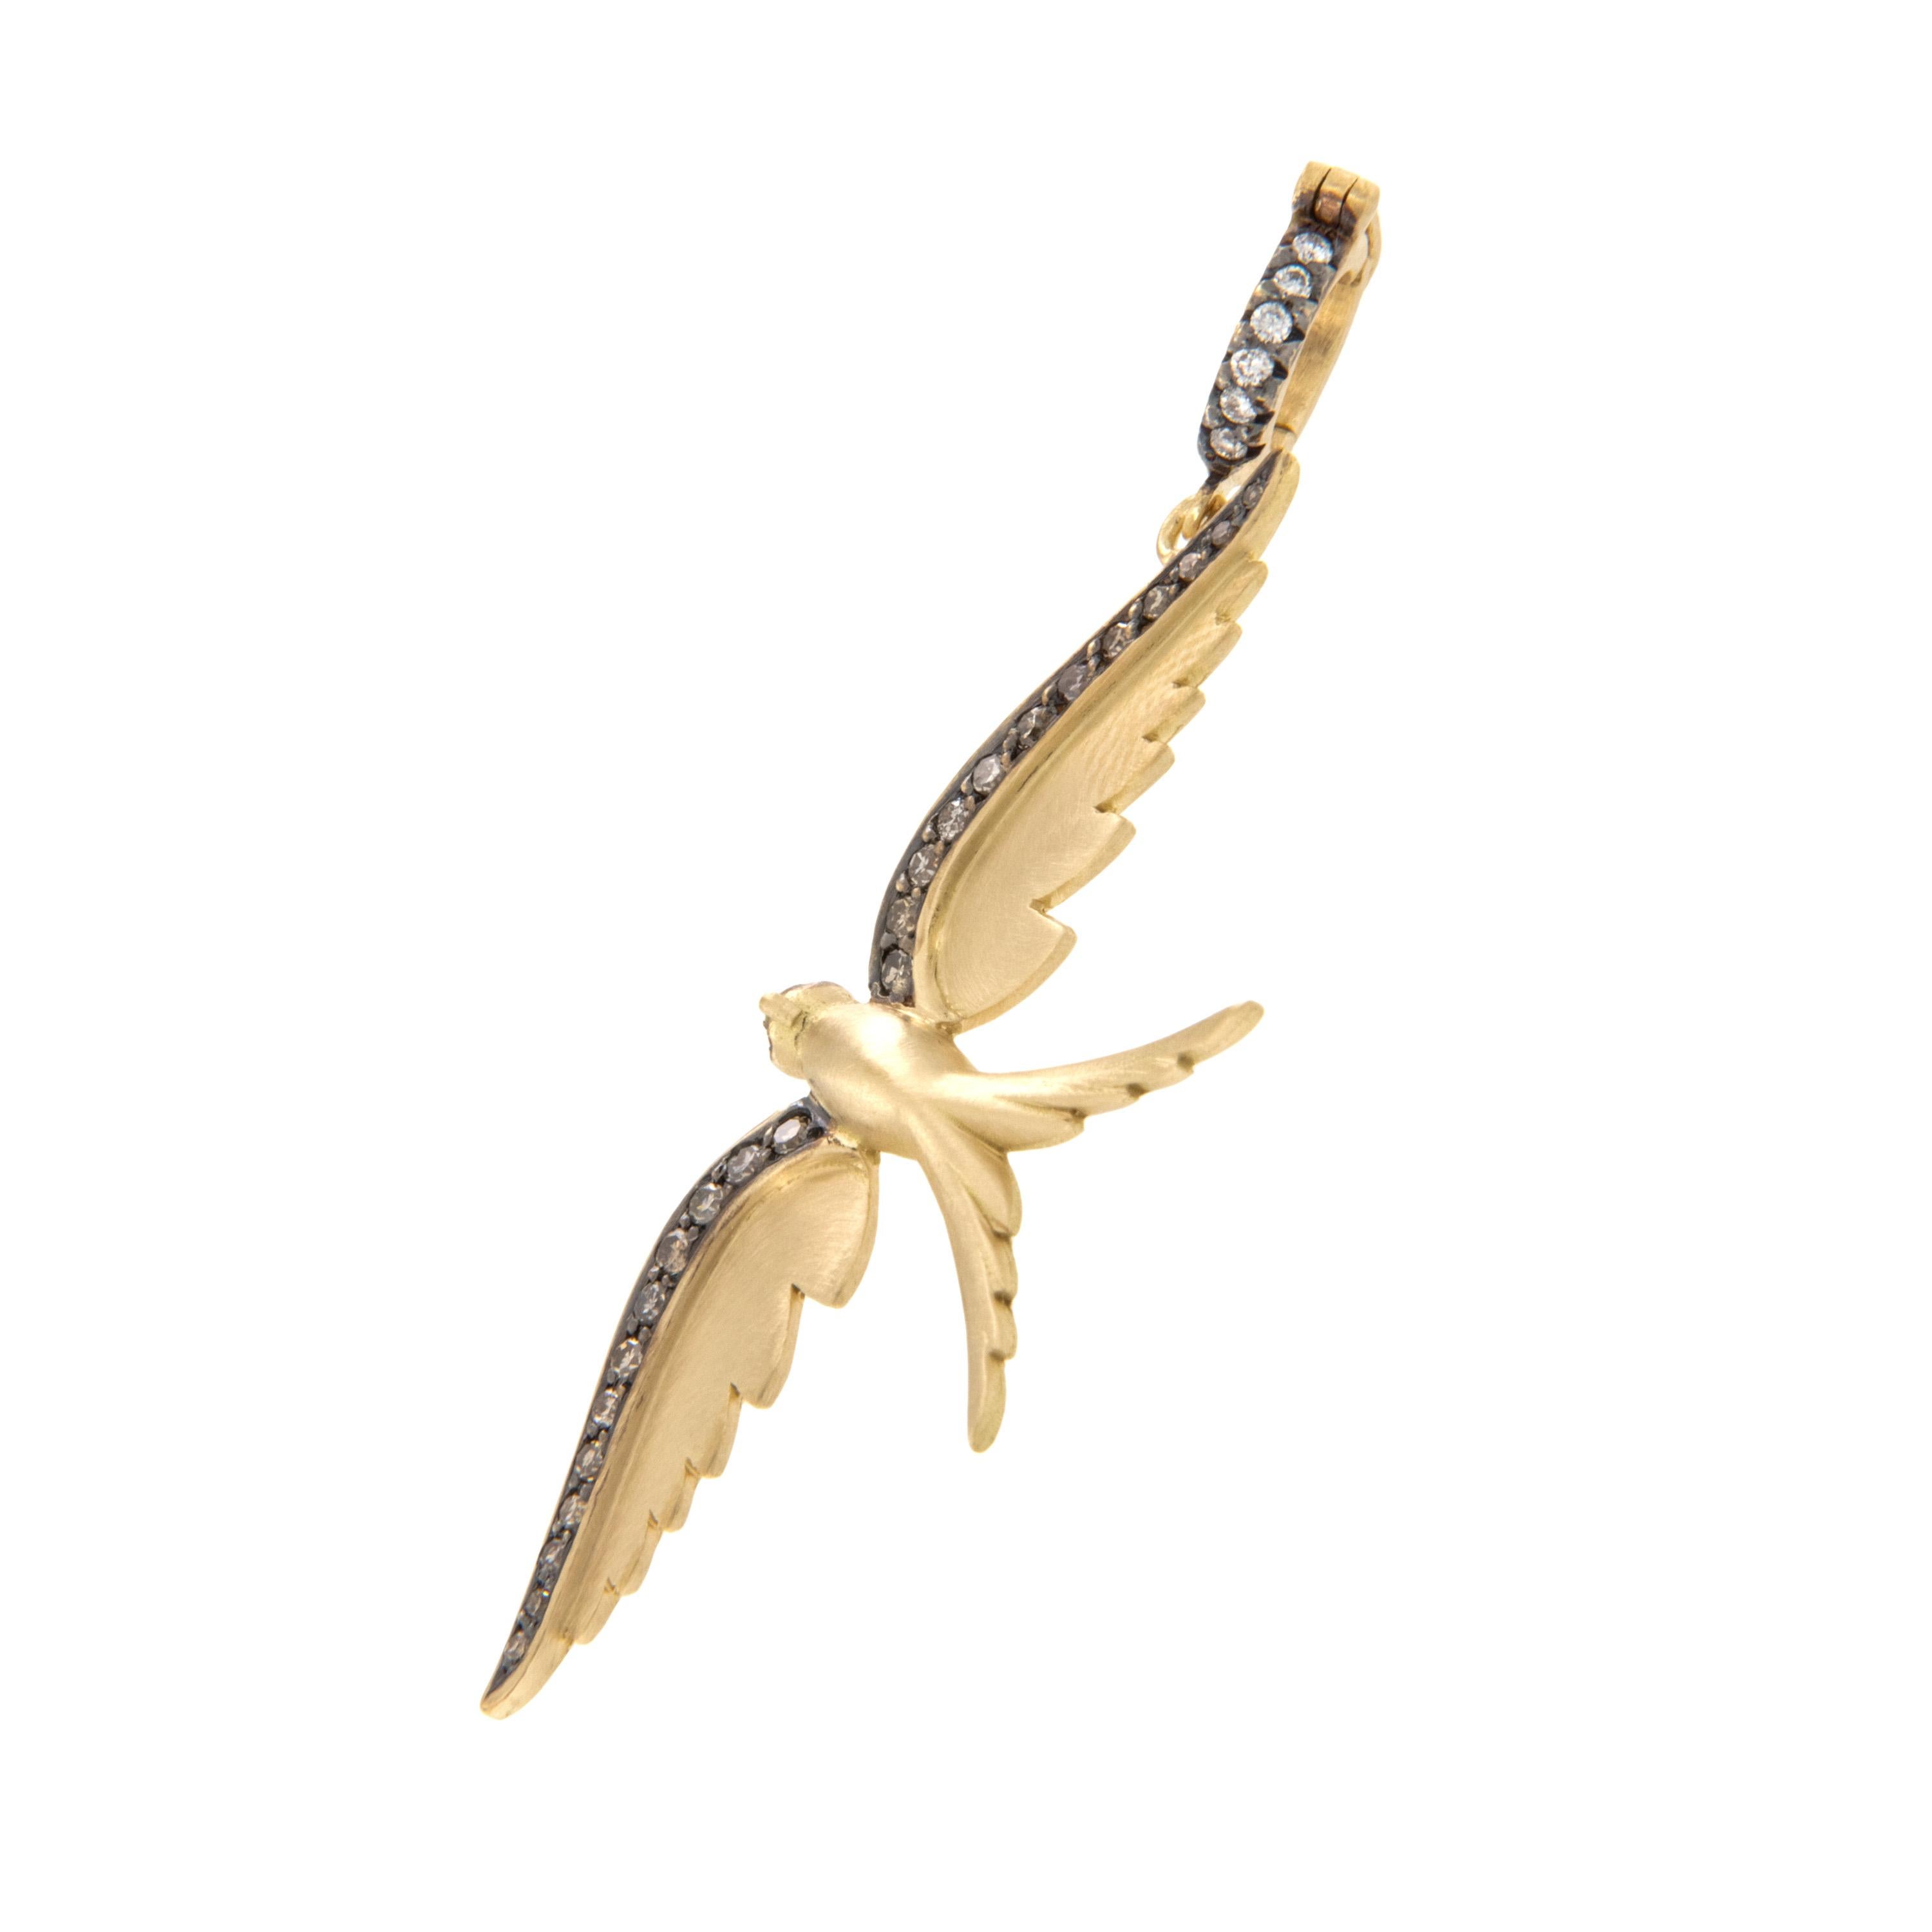 Crafted in rich 18 karat yellow gold this elegant swallowtail bird is edged with 0.19 Cttw Fancy Brown diamonds accented with black rhodium for a striking look! White diamonds = 0.04 Cttw. accent the bail which is hinged making it easy to wear with